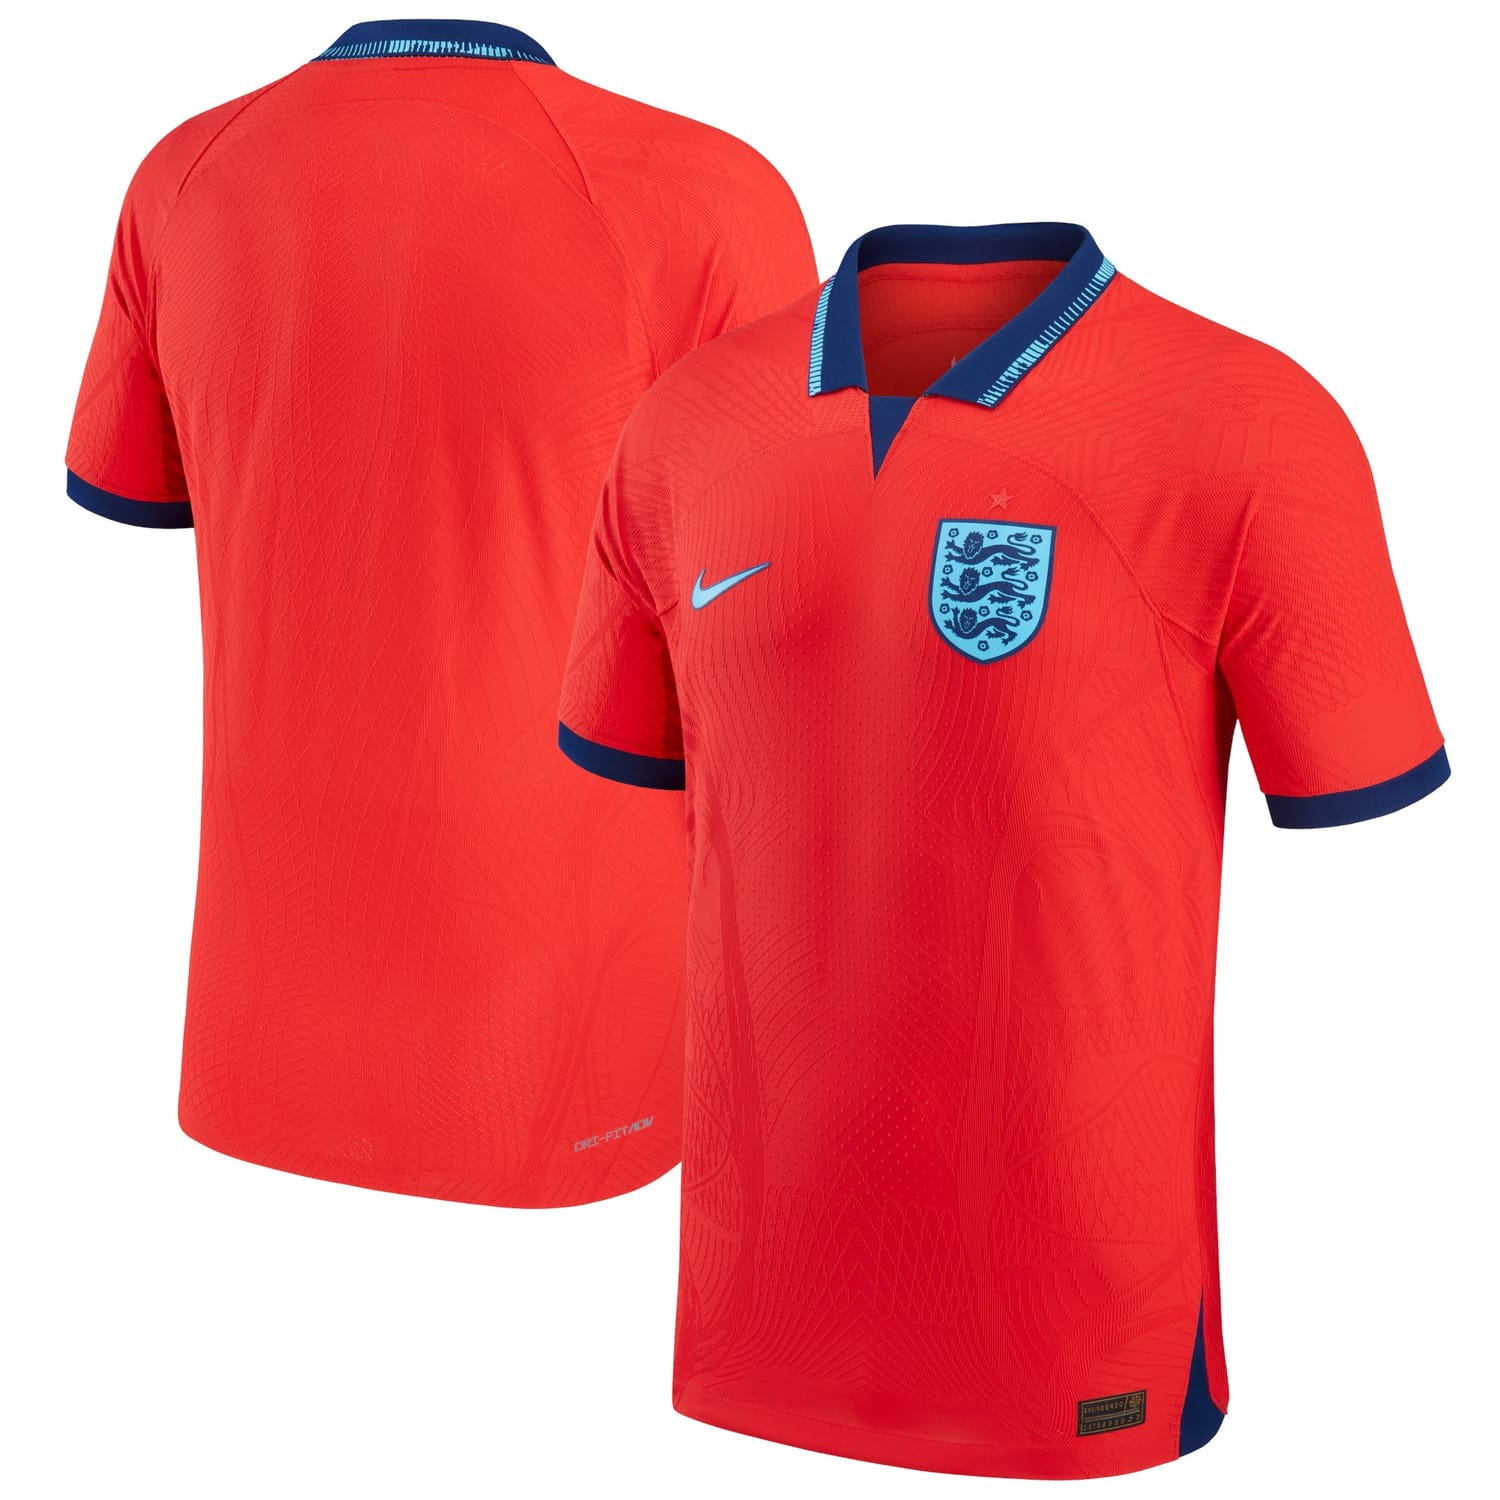 England National Team Away Authentic Jersey Shirt 2022 for Men